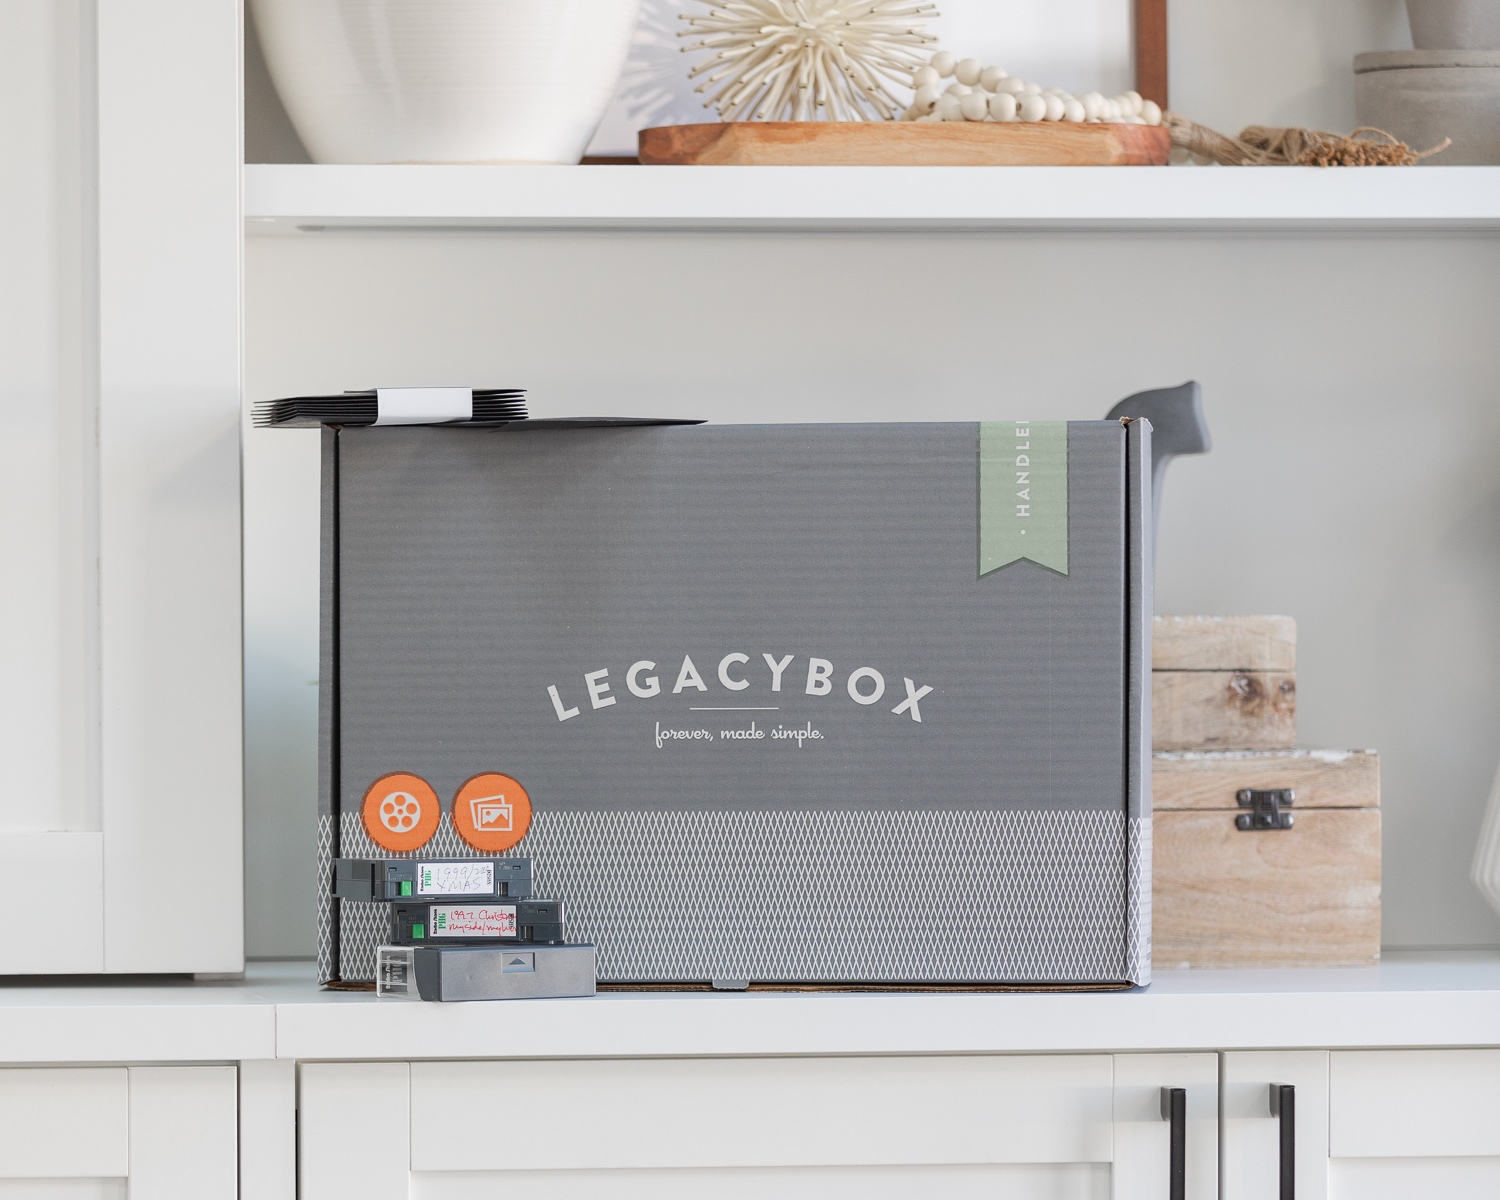 Digitizing My Home Videos with Legacybox